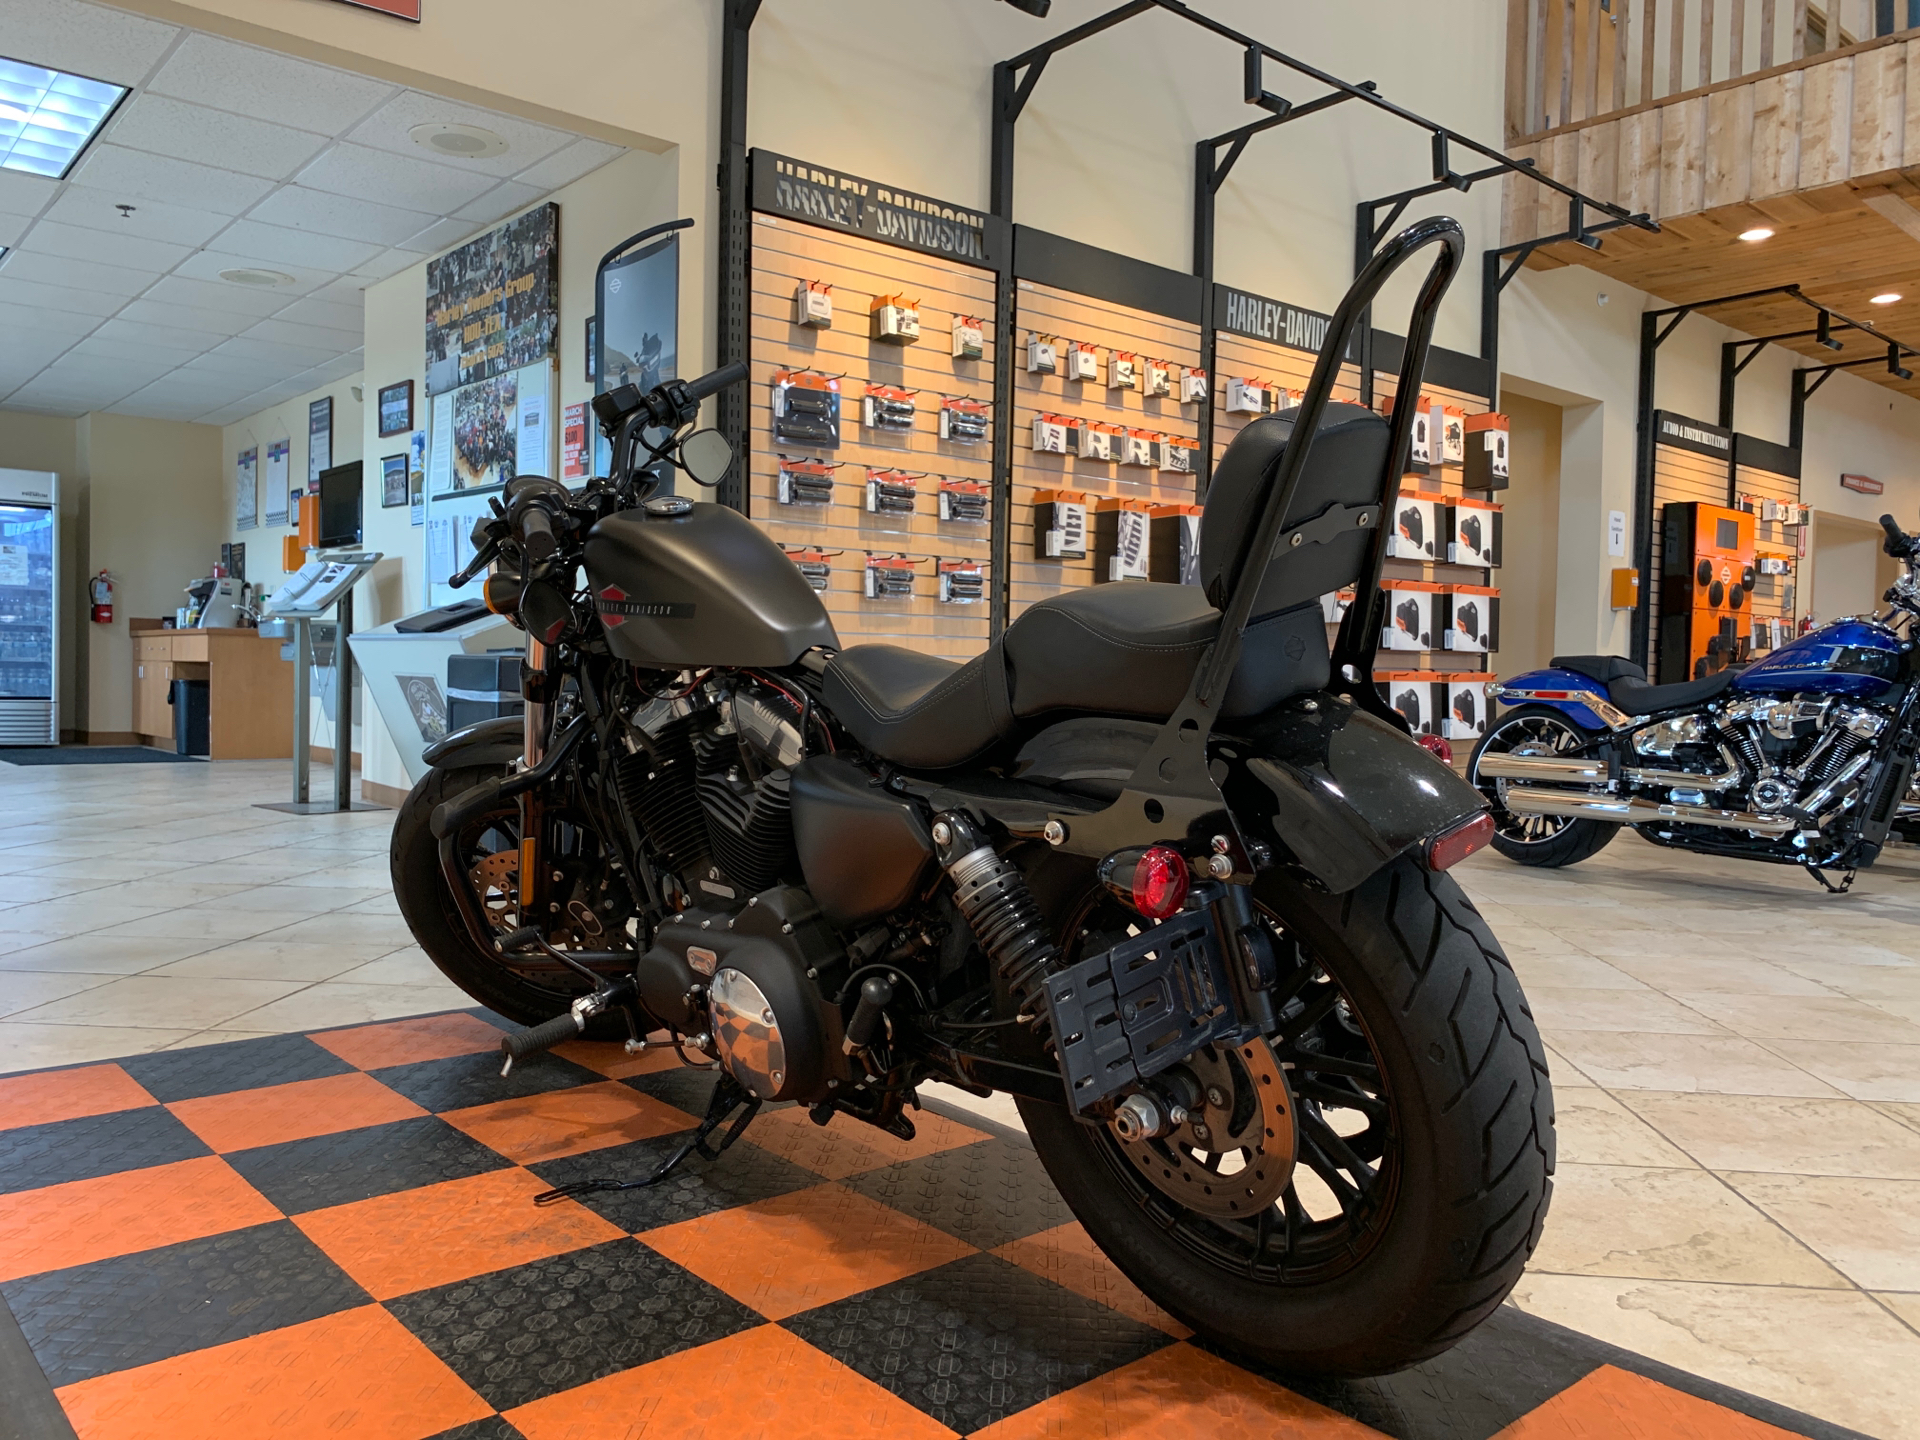 2020 Harley-Davidson Forty-Eight® in Houston, Texas - Photo 4